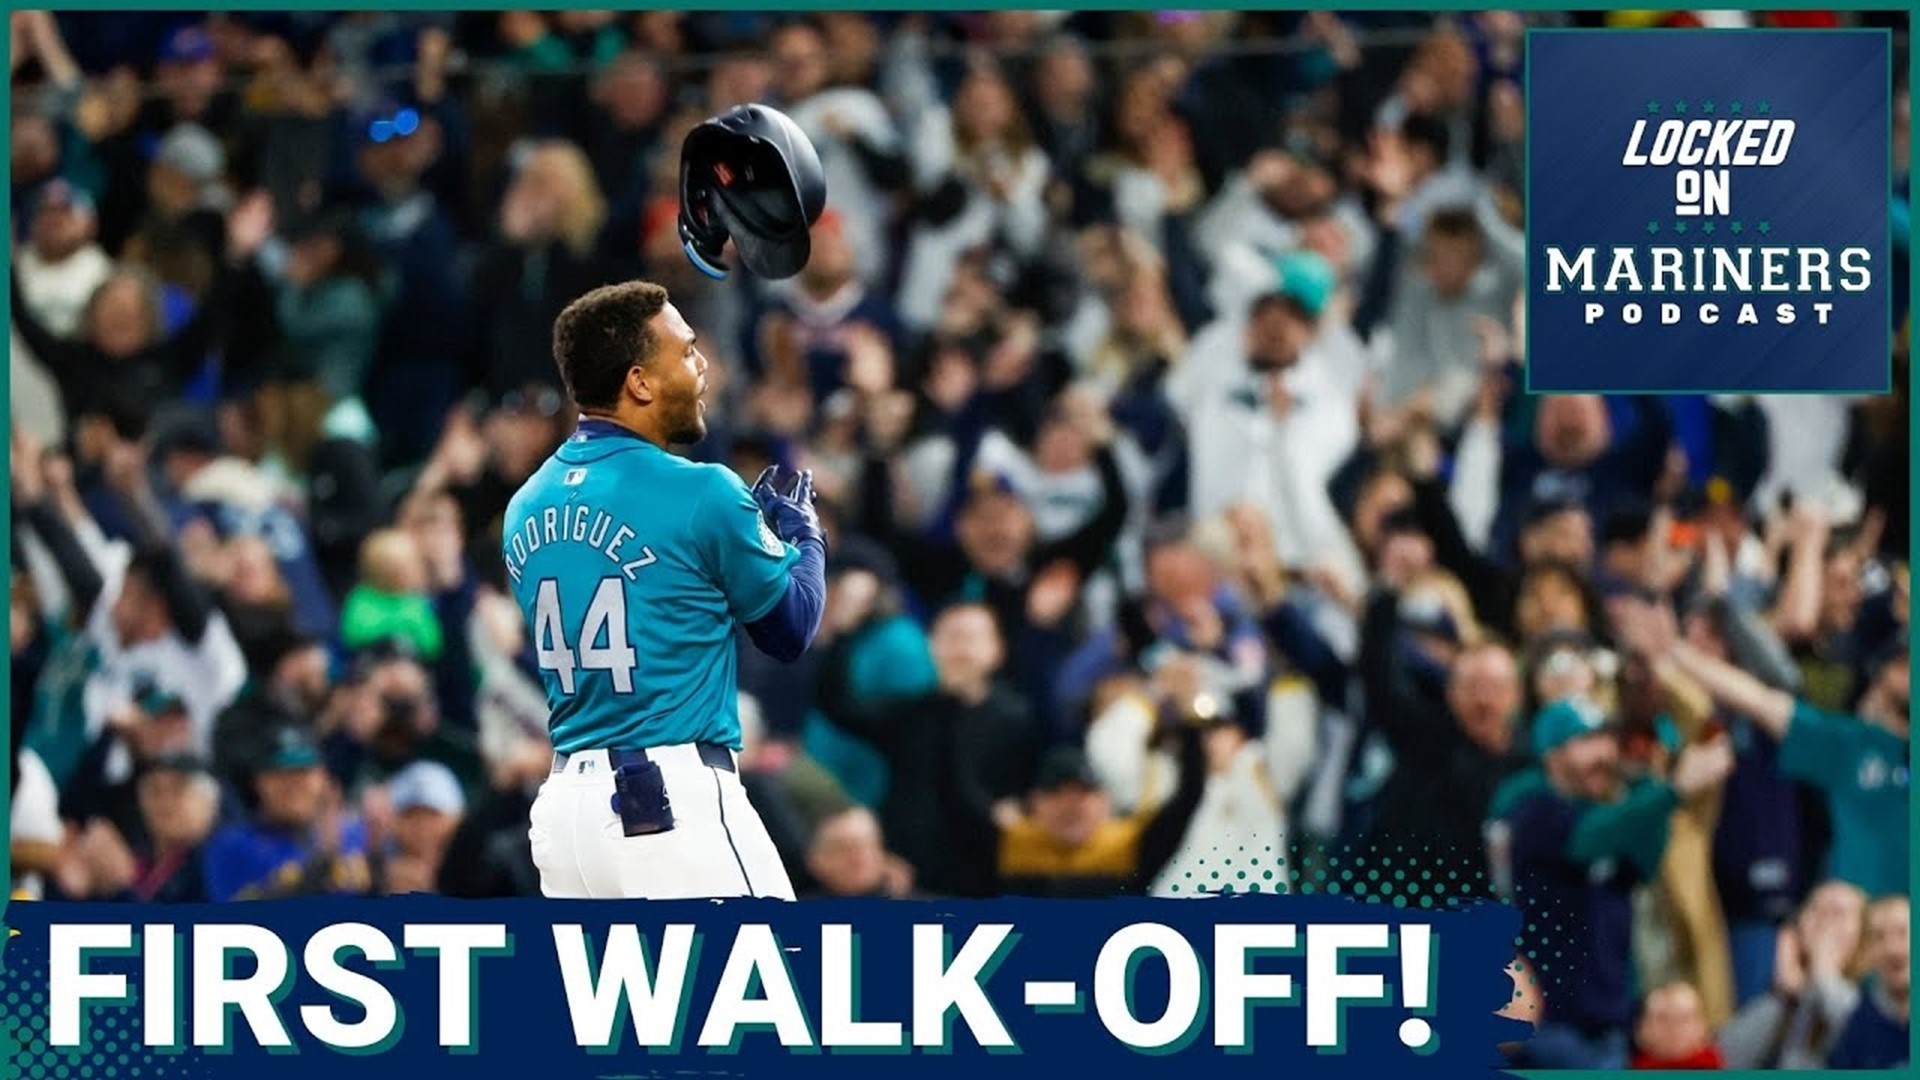 Despite a mostly lethargic night, the Mariners' bats came through when needed the most, rattling off three runs in the bottom of the 10th to stun the Red Sox.